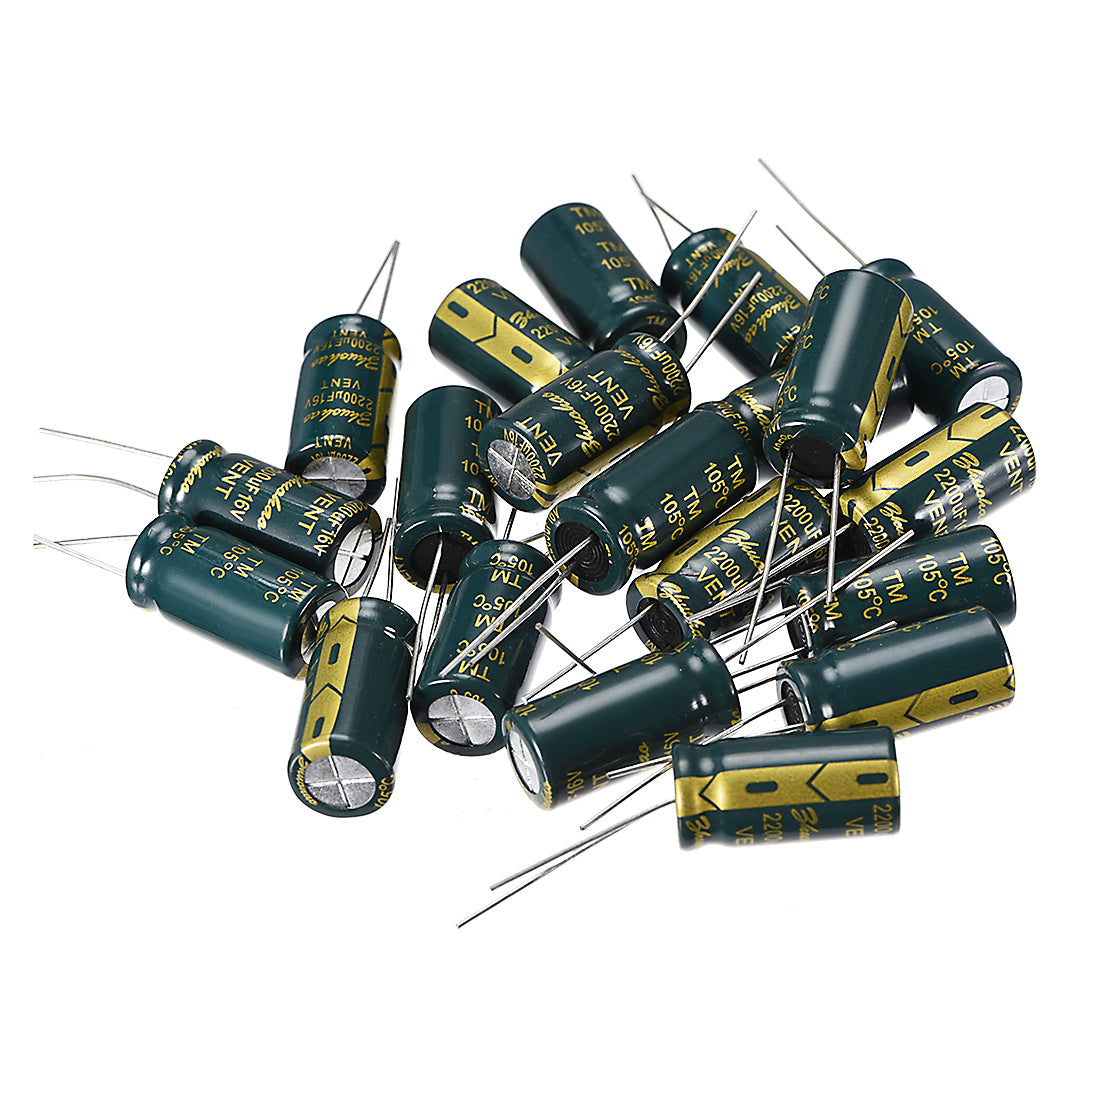 uxcell Uxcell Aluminum Radial Electrolytic Capacitor Low ESR Green with 2200UF 16V 105 Celsius Life 3000H 10 x 20 mm High Ripple Current,Low Impedance 20pcs